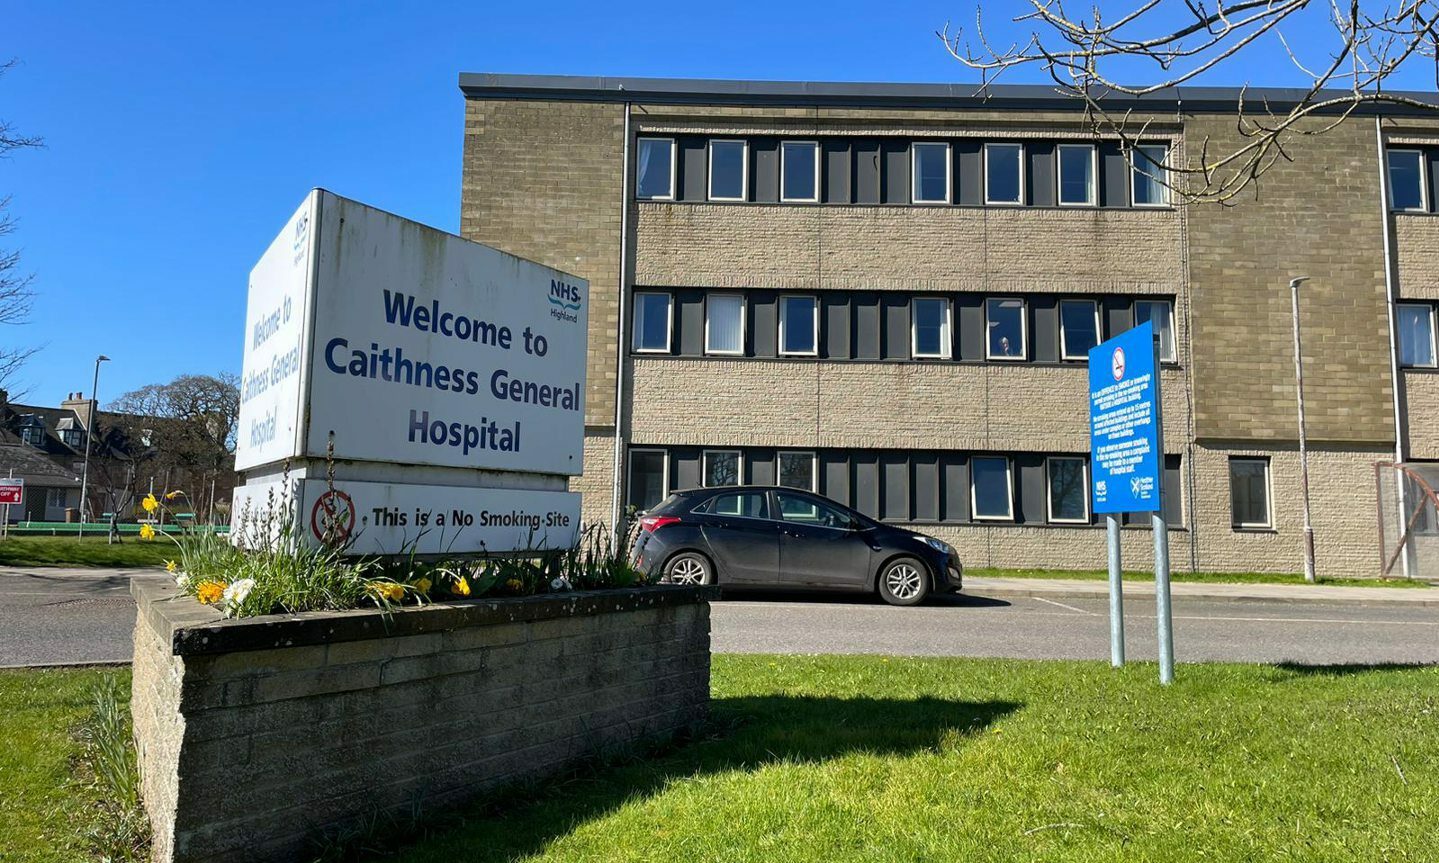 Exterior view of main sign and building of Caithness General Hospital with a black car parked outside. 